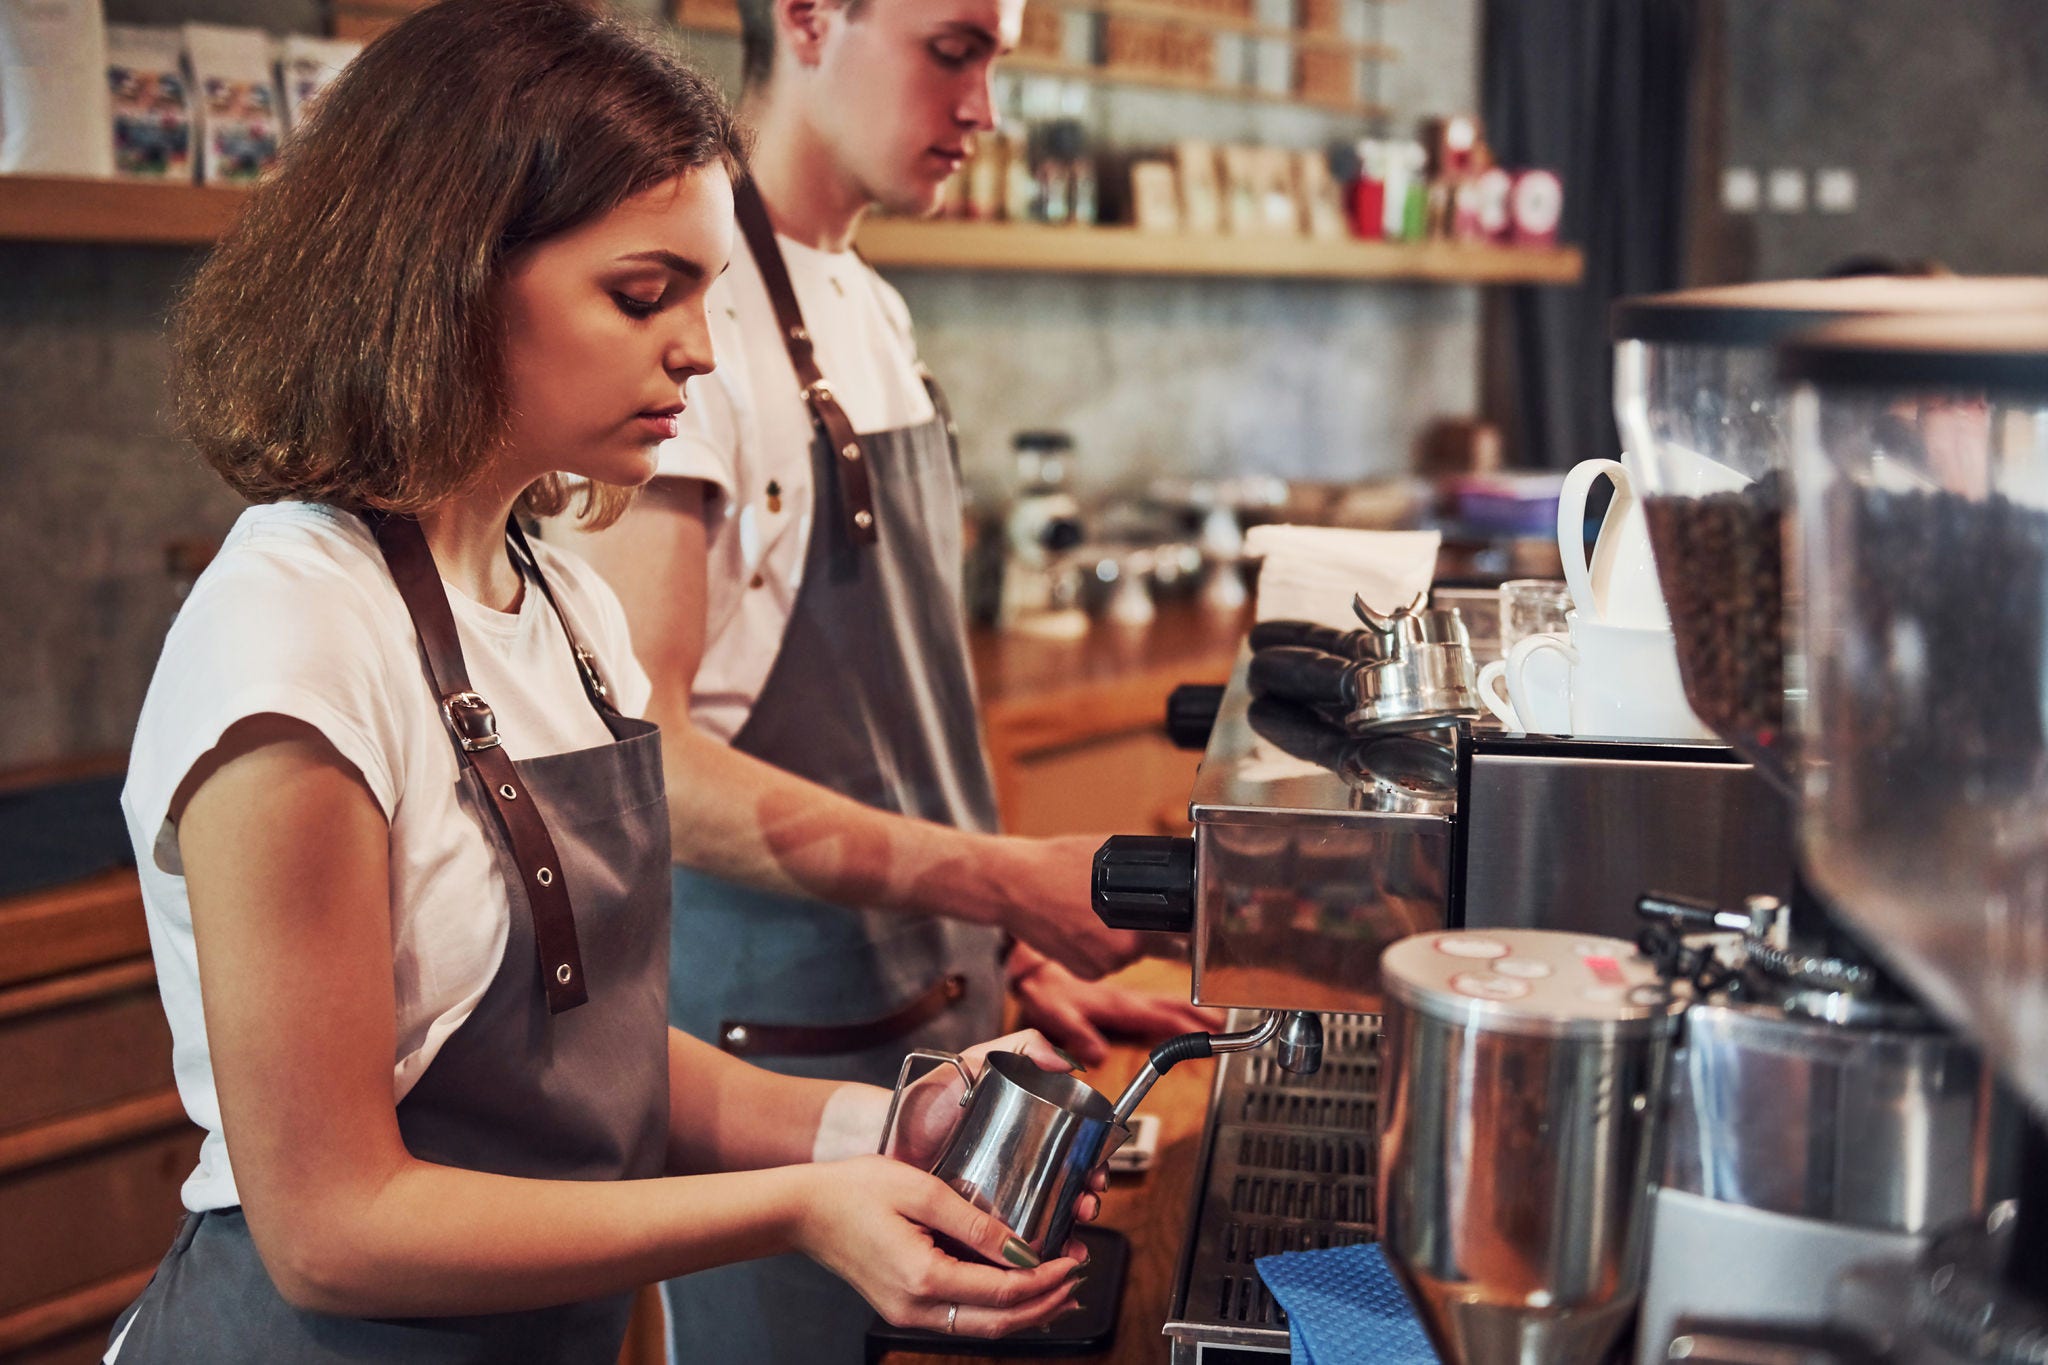 young woman and young man working as baristas in a coffee shop making coffee